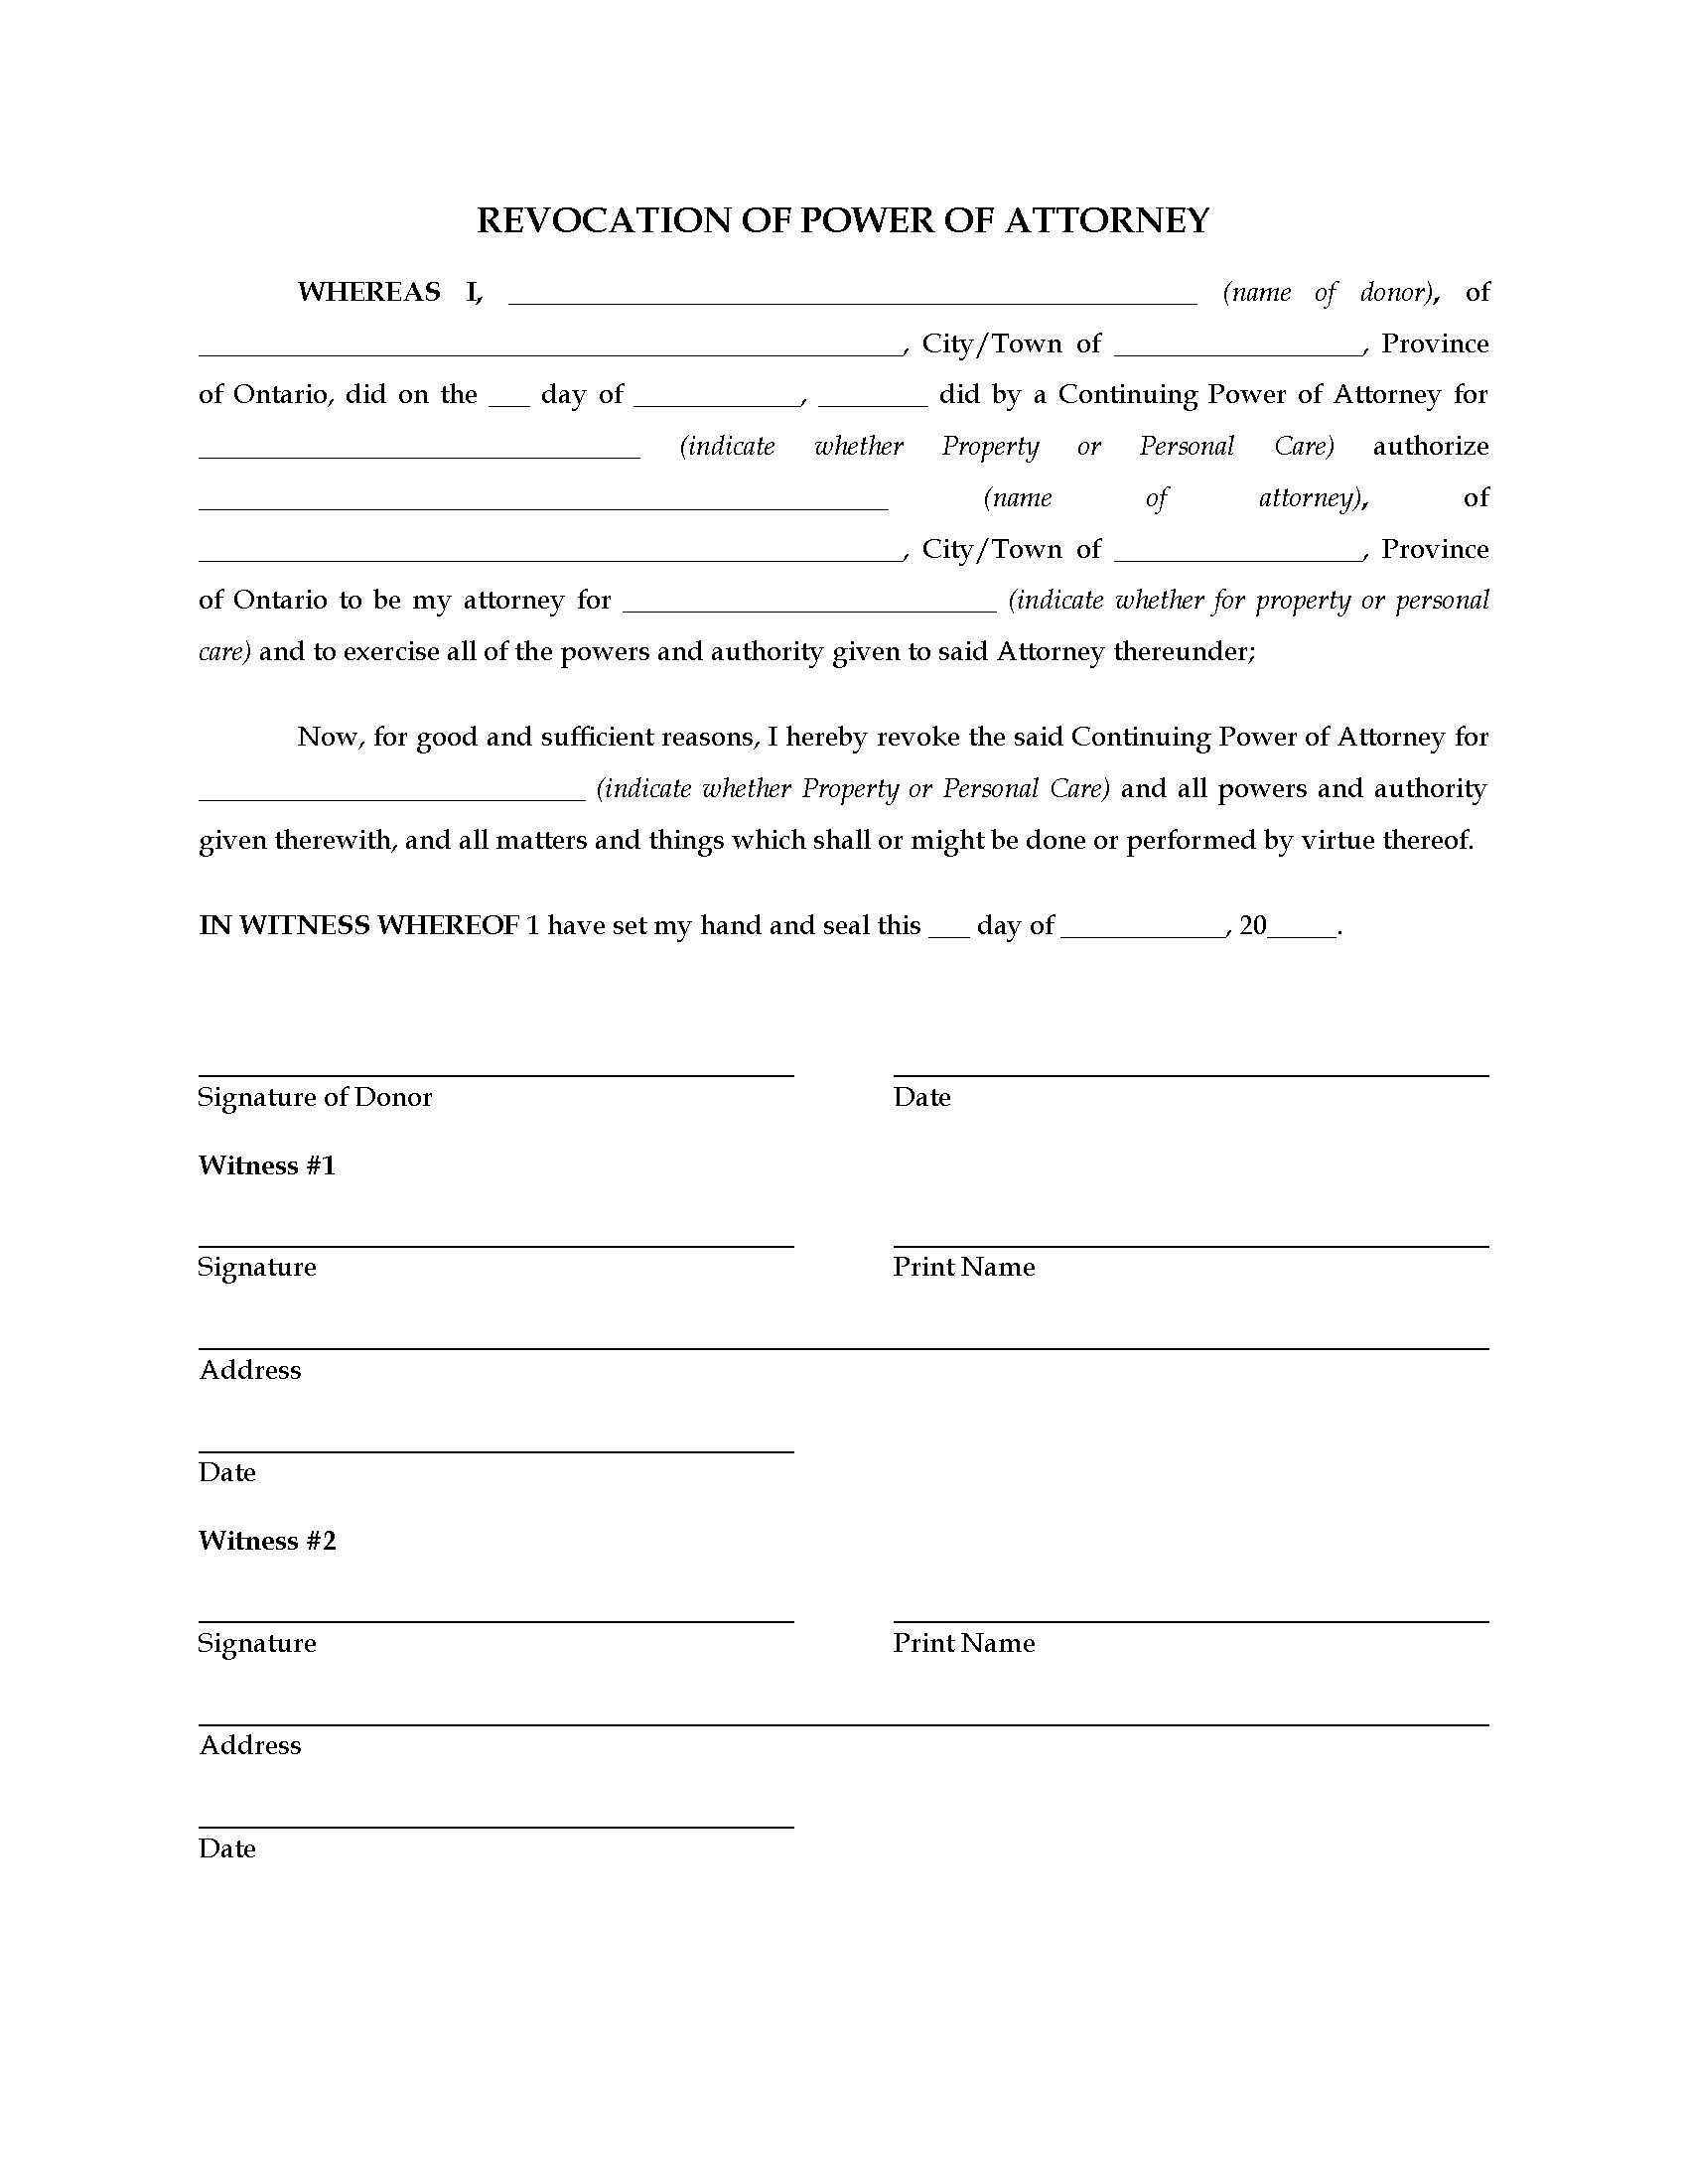 Free Durable Power Of Attorney Forms To Print – Printable Sample - Free Printable Revocation Of Power Of Attorney Form